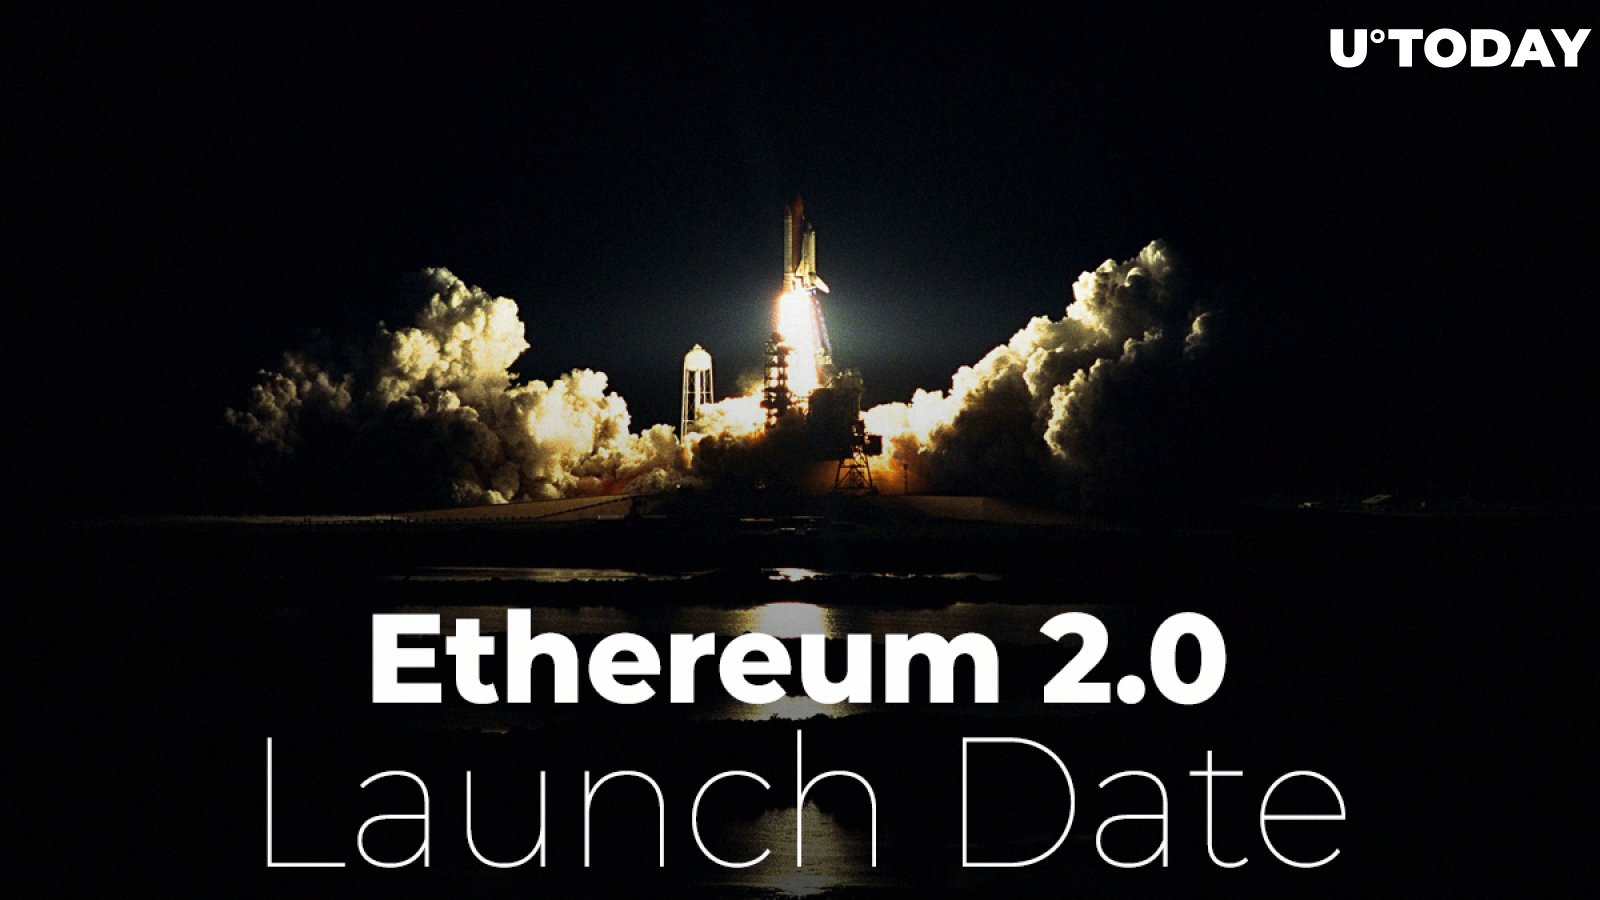 Ethereum 2.0 Developer Revealed the Potential ETH 2.0 Launch Date